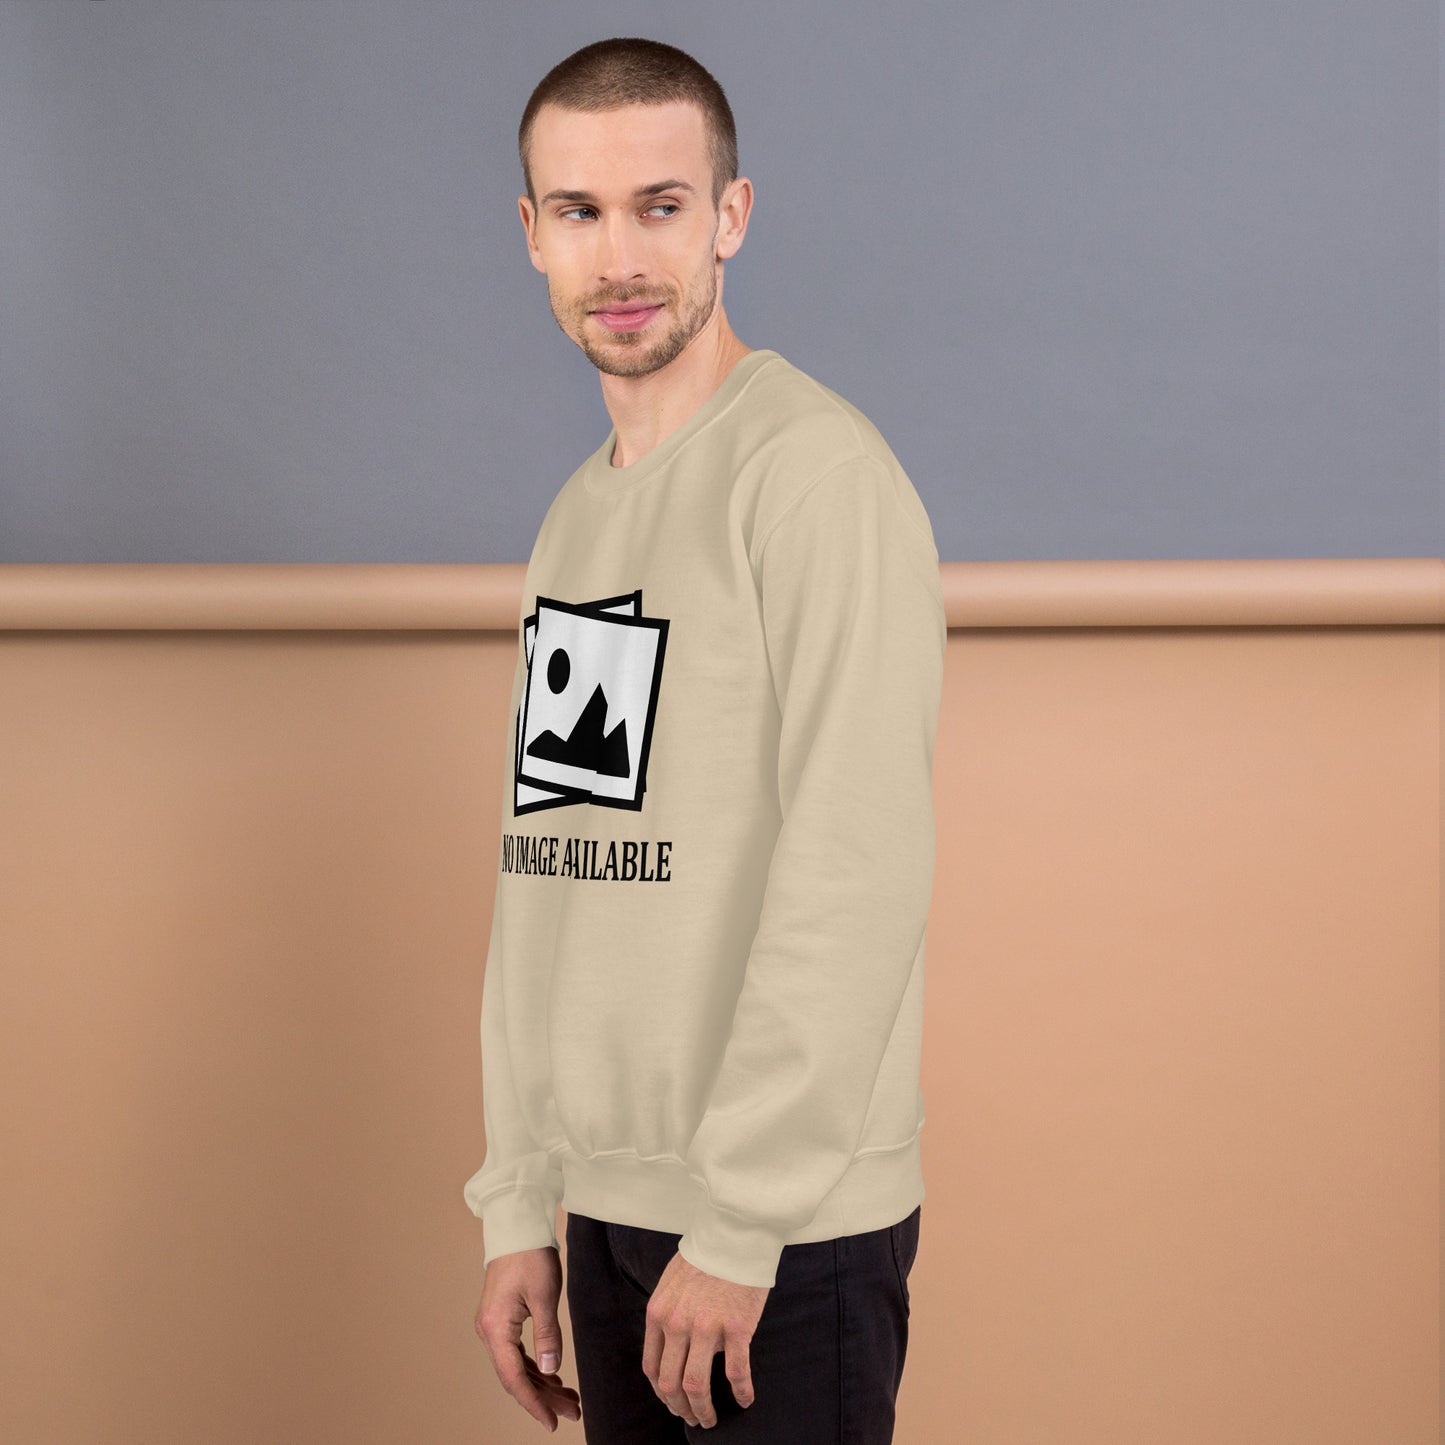 Men with sand sweatshirt with image and text "no image available"